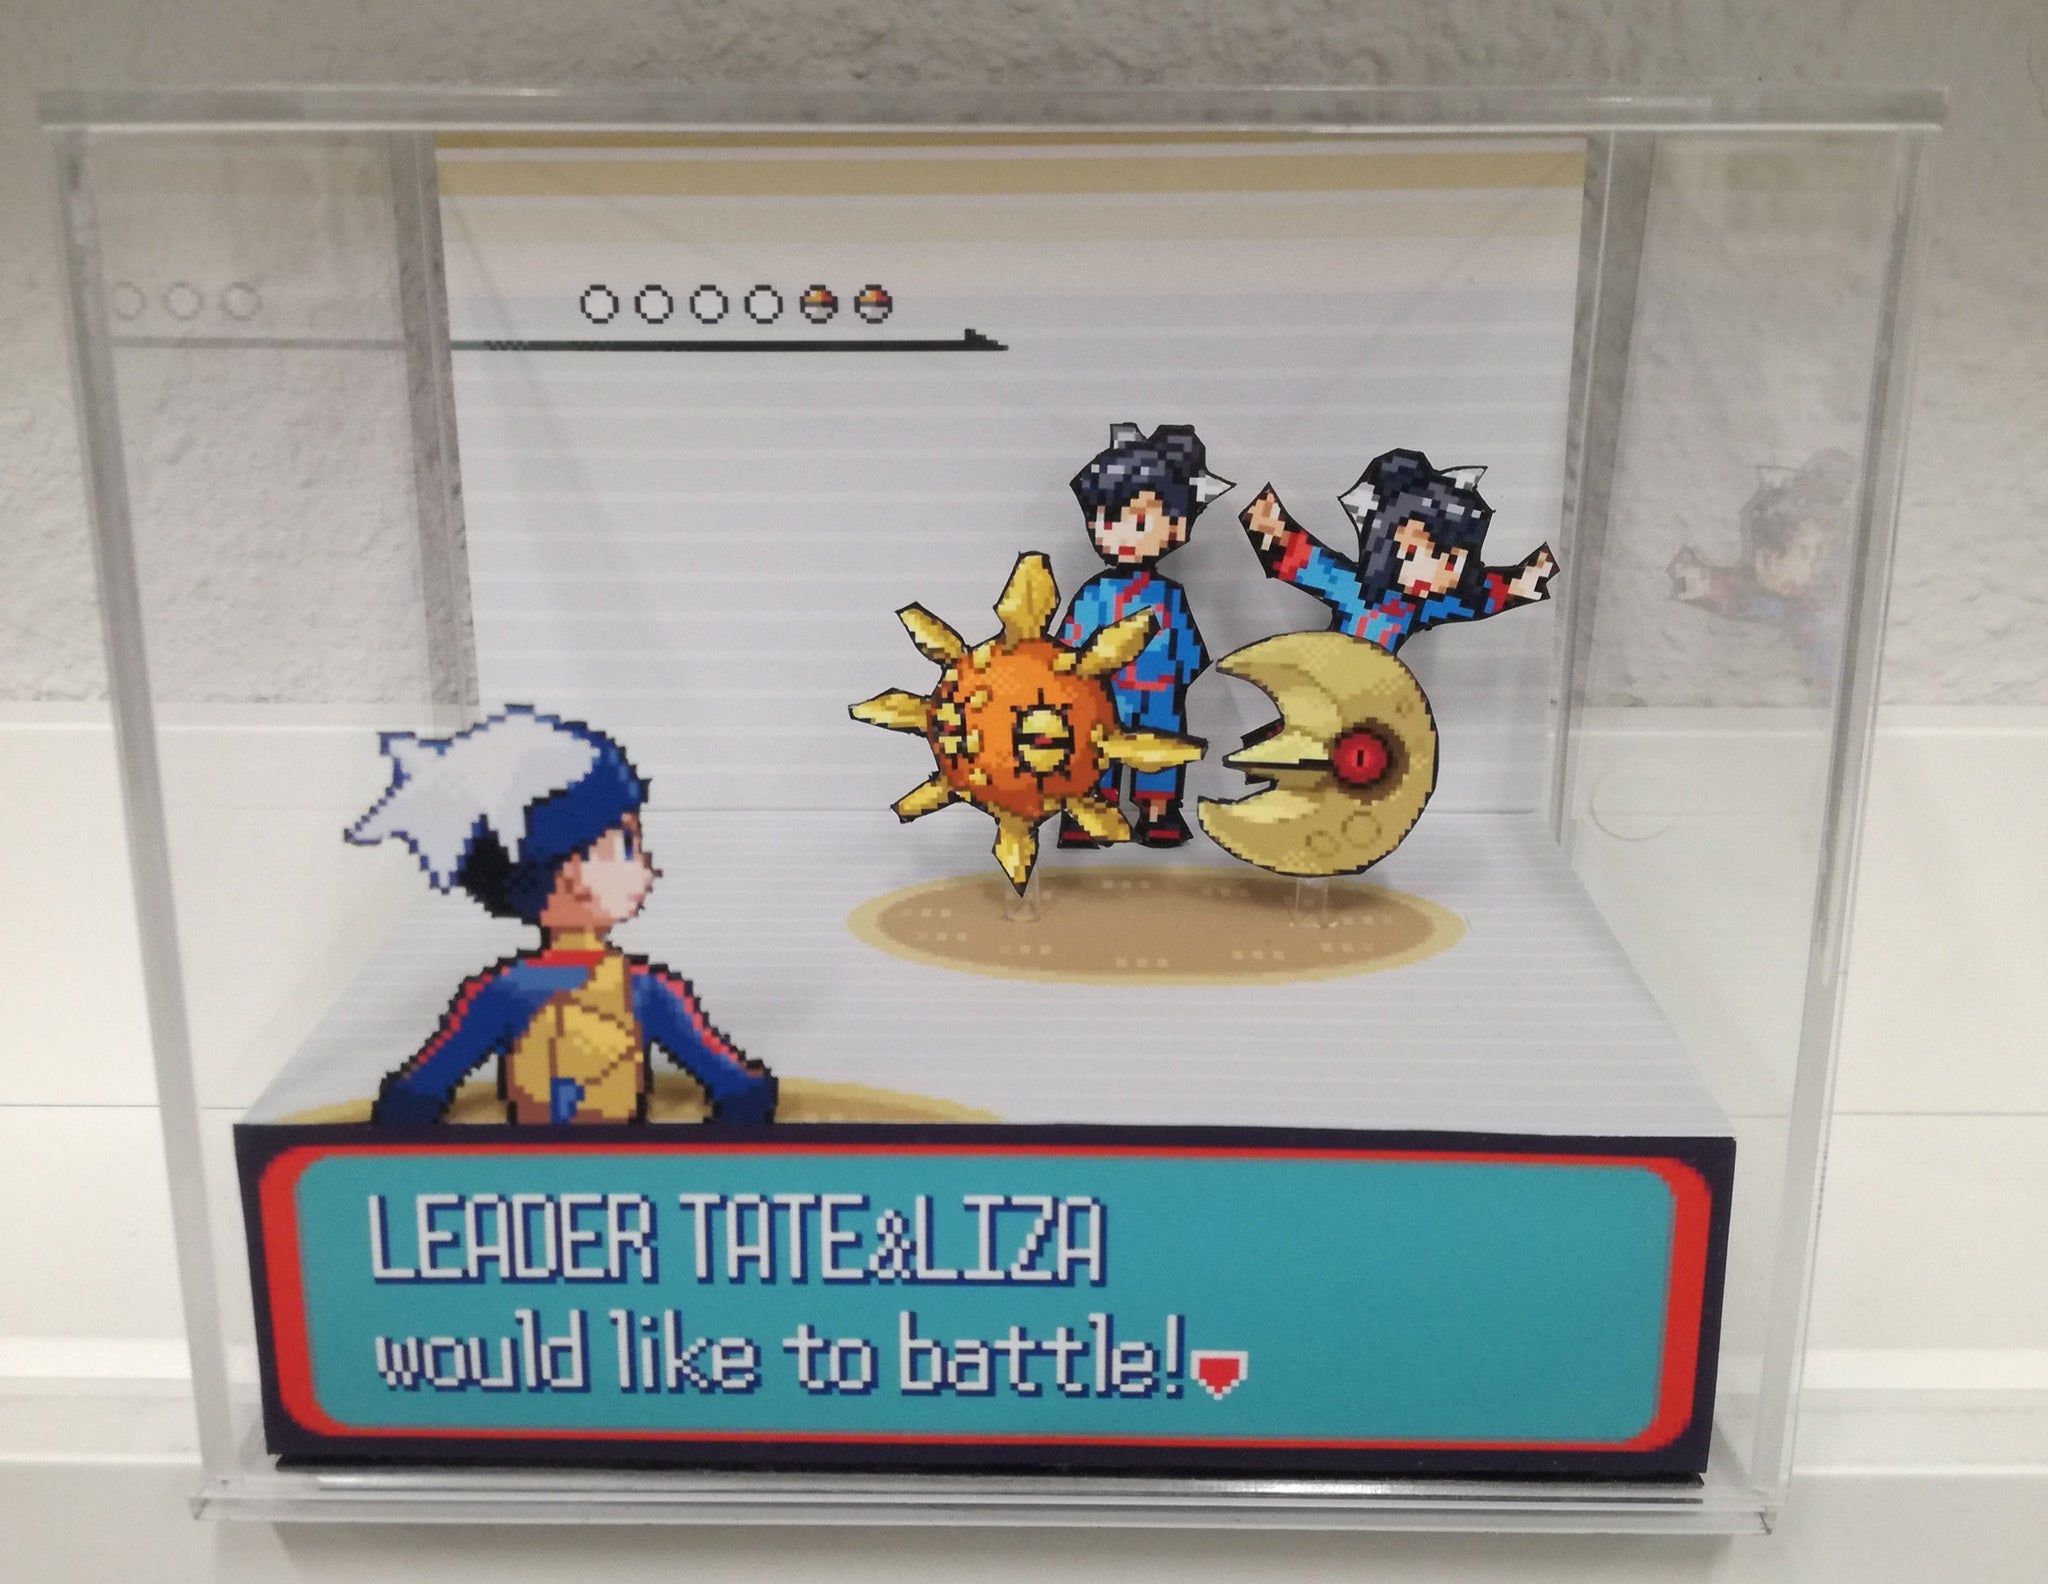 Pokemon Soul Silver/Heart Gold Gym Leaders Cubic Diorama – ARTS-MD